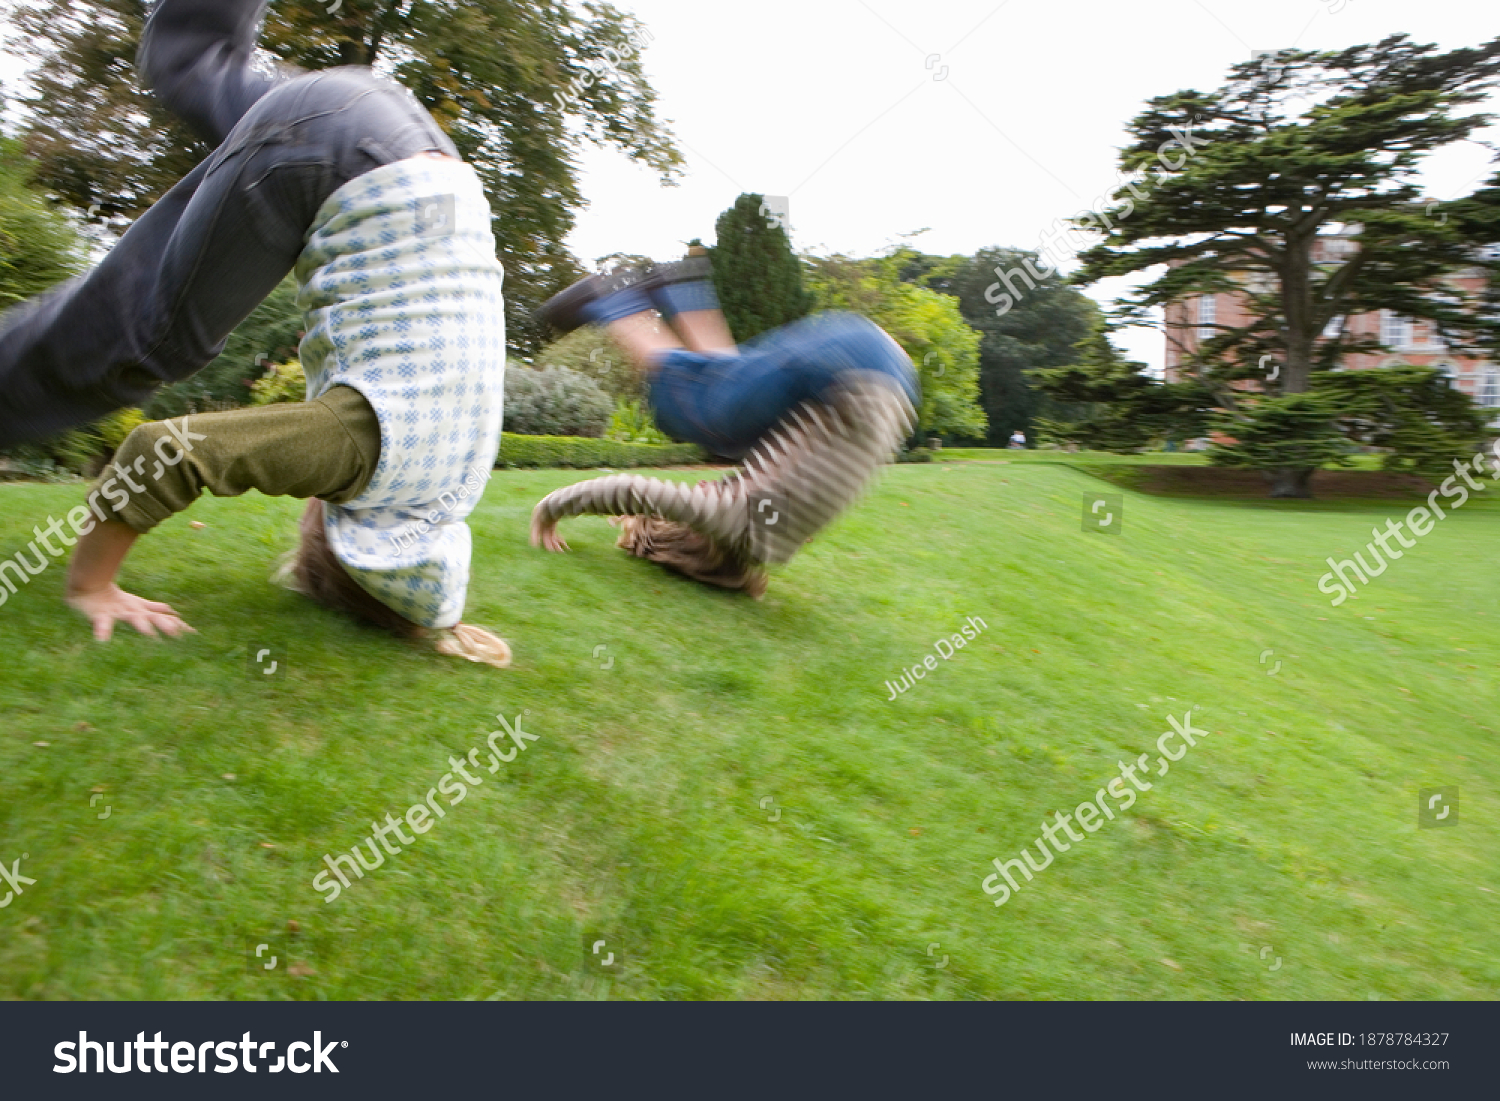 Motion blur of a young boy and a girl rolling down a hill slope. #1878784327